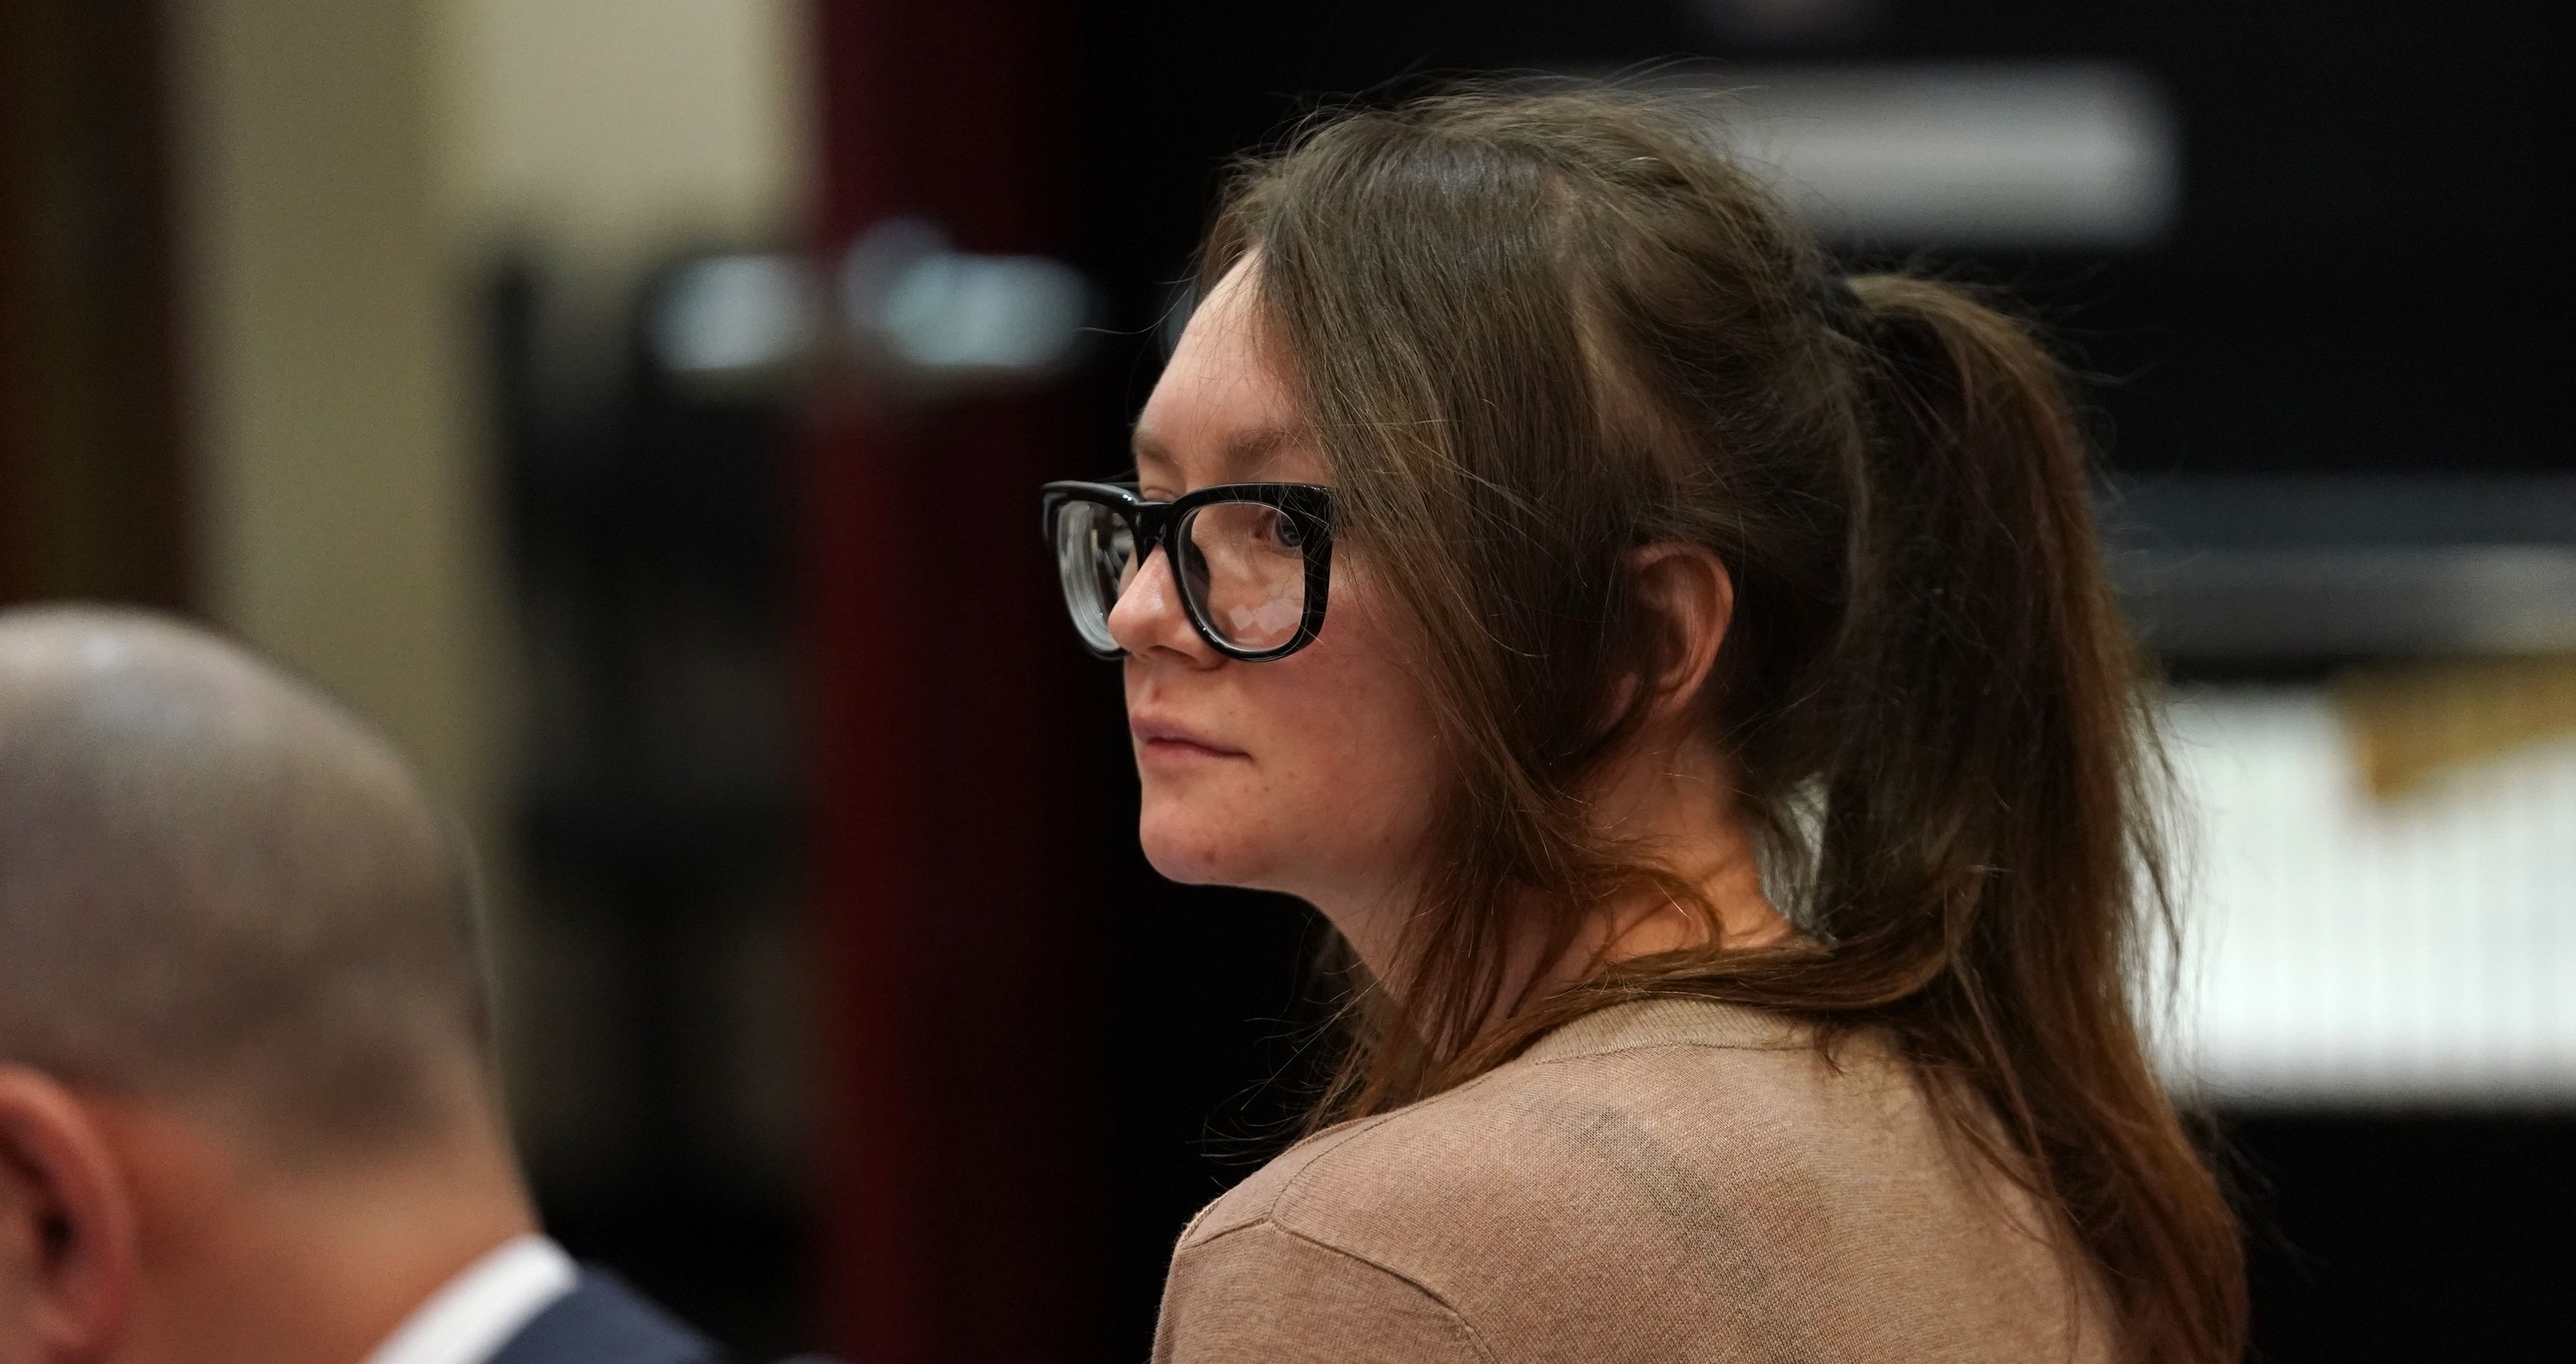 Anna Sorokin looks over her left shoulder during her jury trial for grand larceny